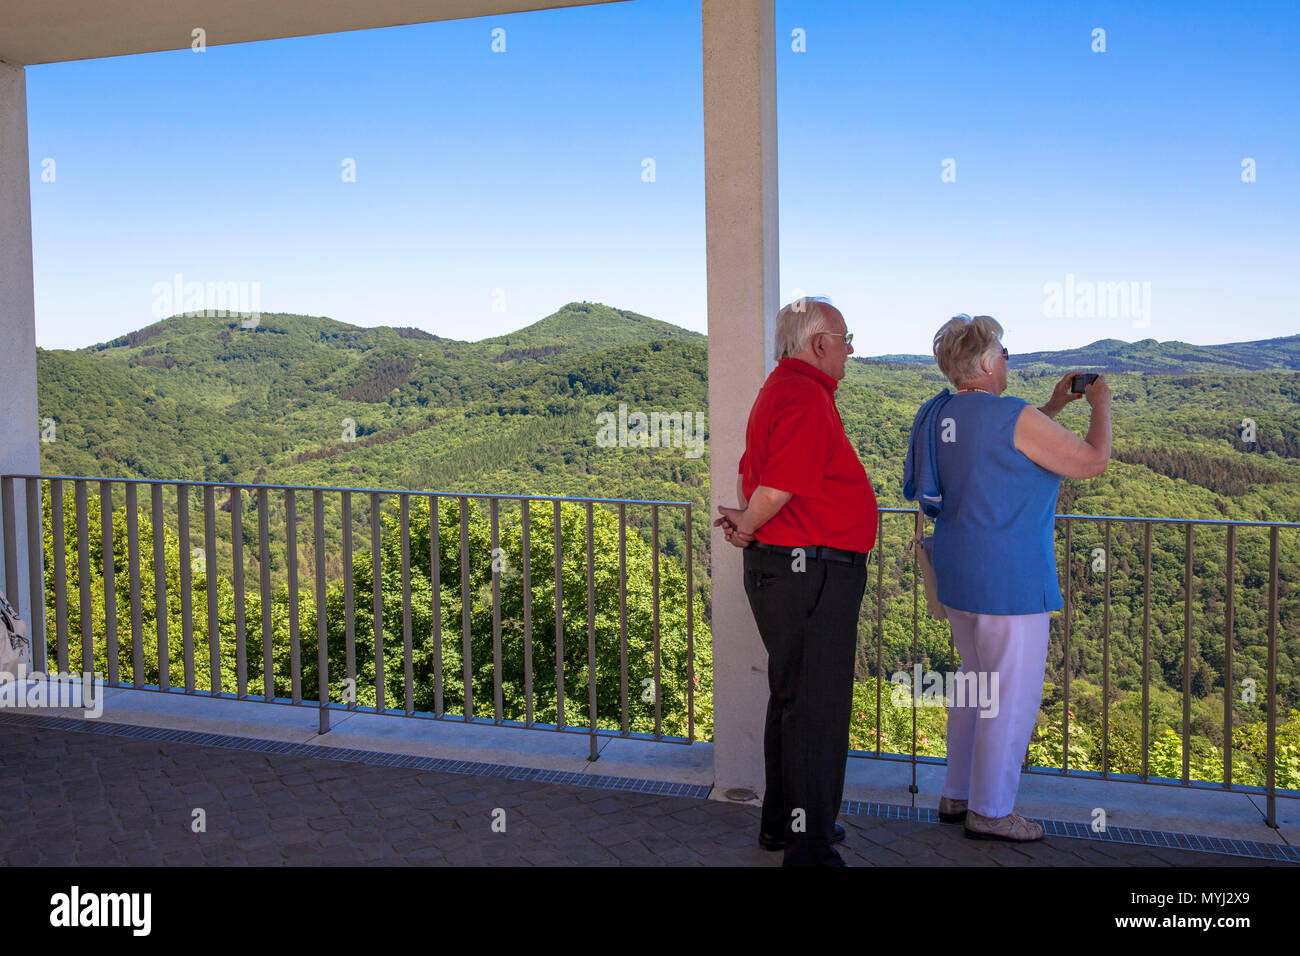 Germany, Siebengebirge, visitors on the terrace of the Drachenfels mountain looking to the arboreous hills of the natural park Siebengebirge near Koen Stock Photo